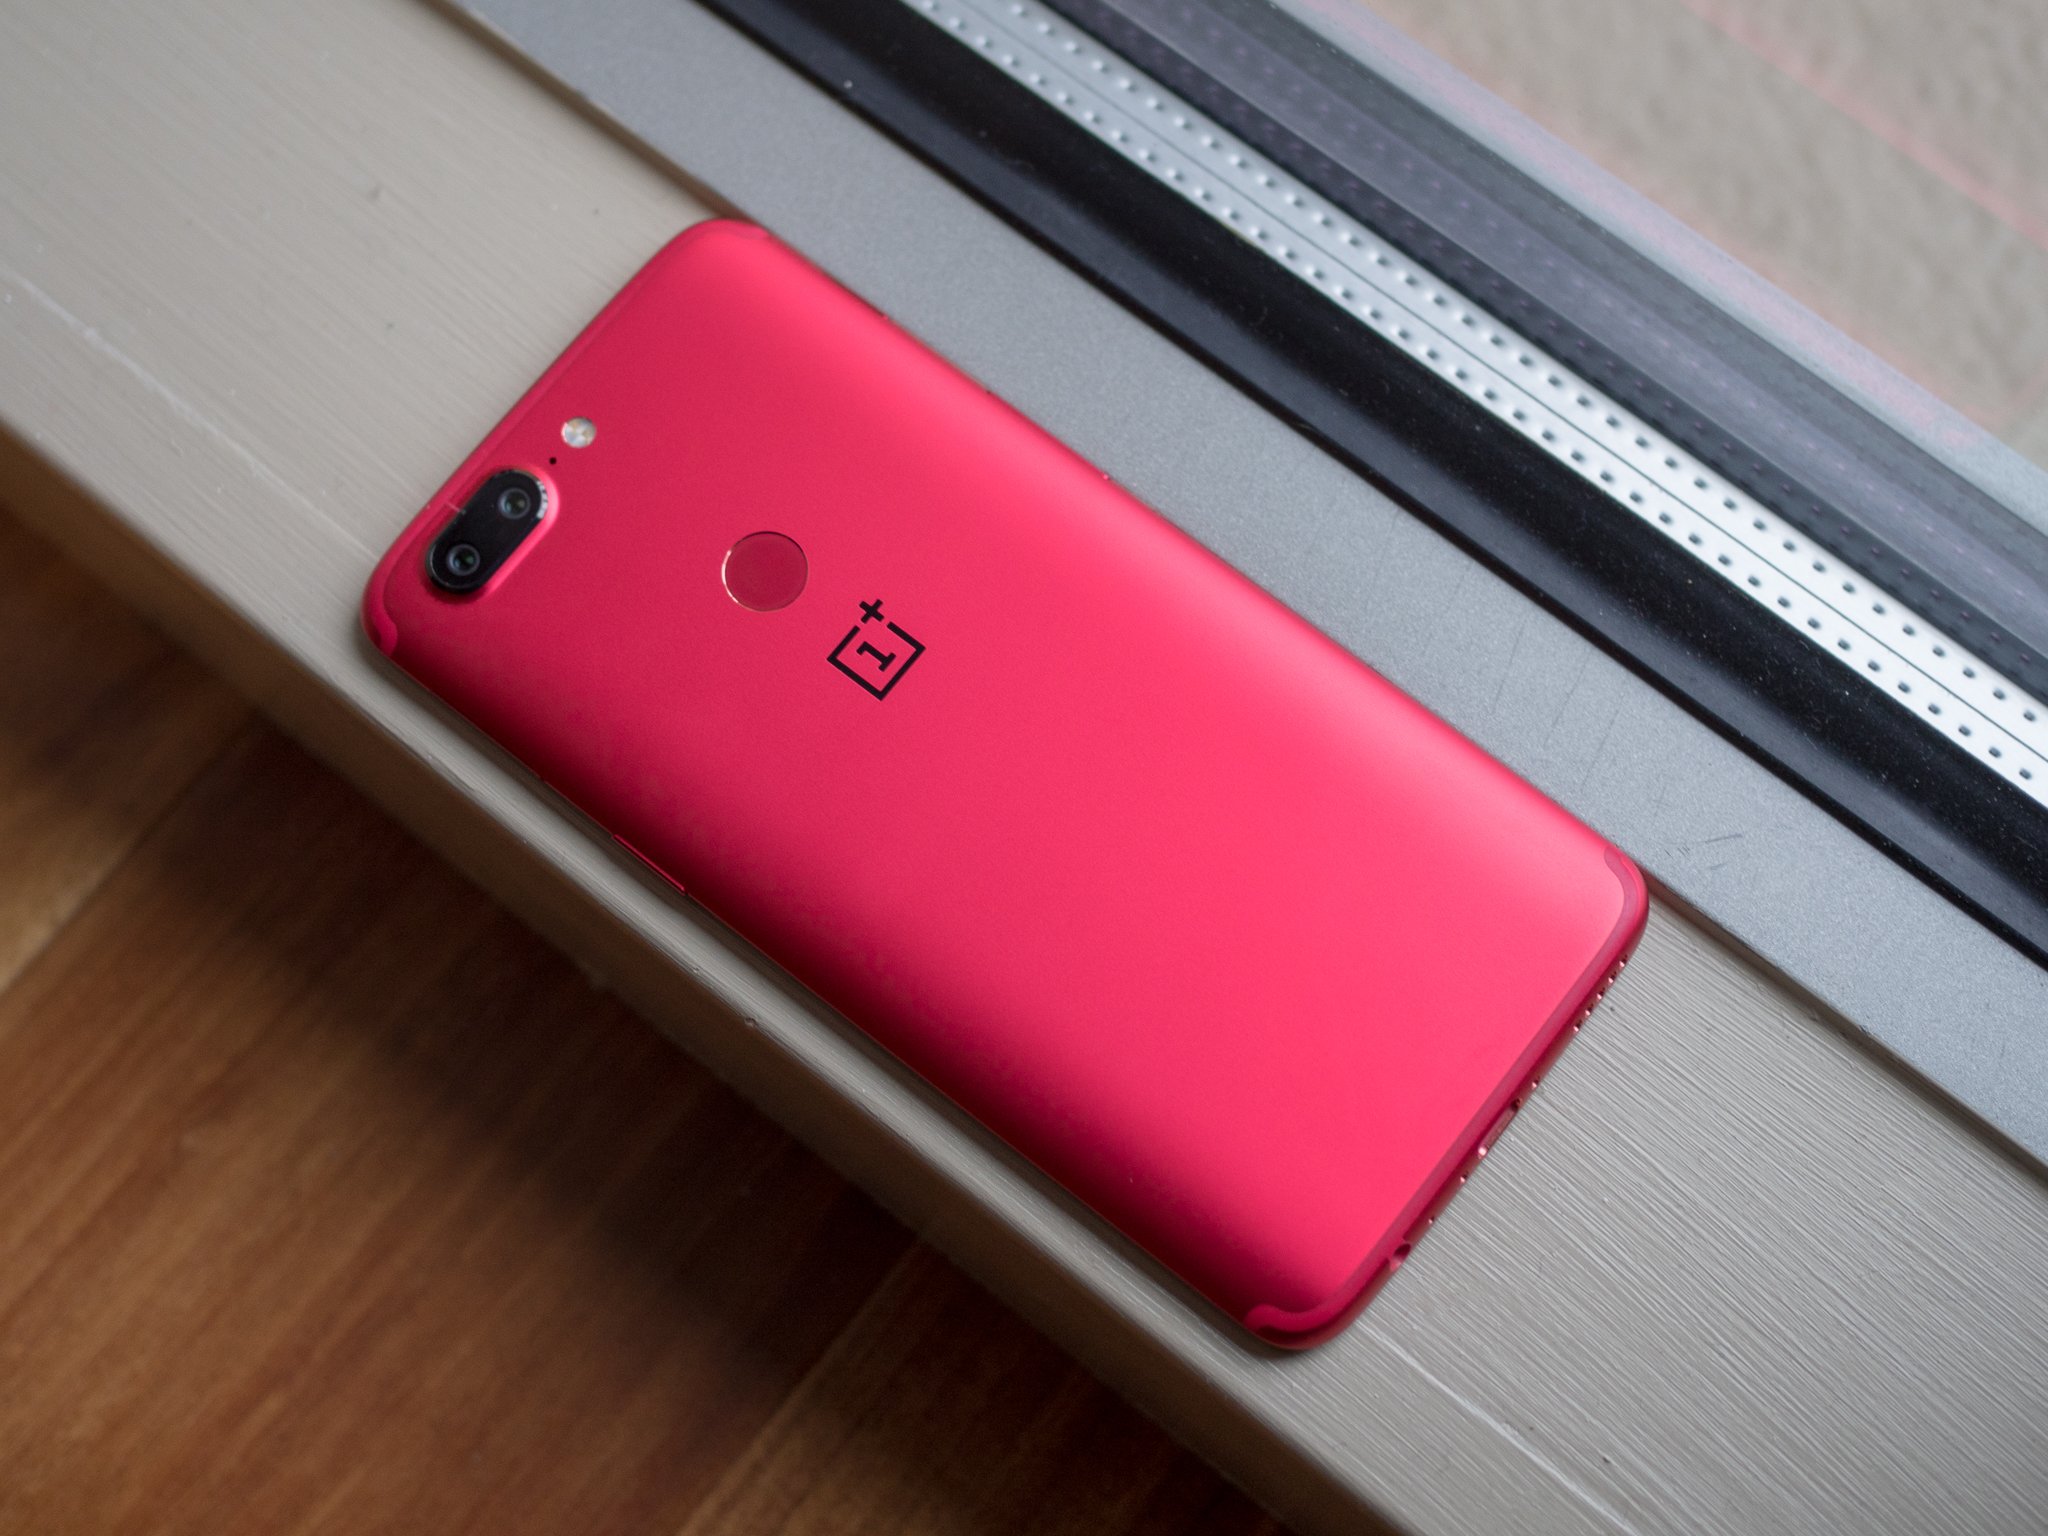 oneplus-5t-lava-red-back-laying-down-11j60.jpg